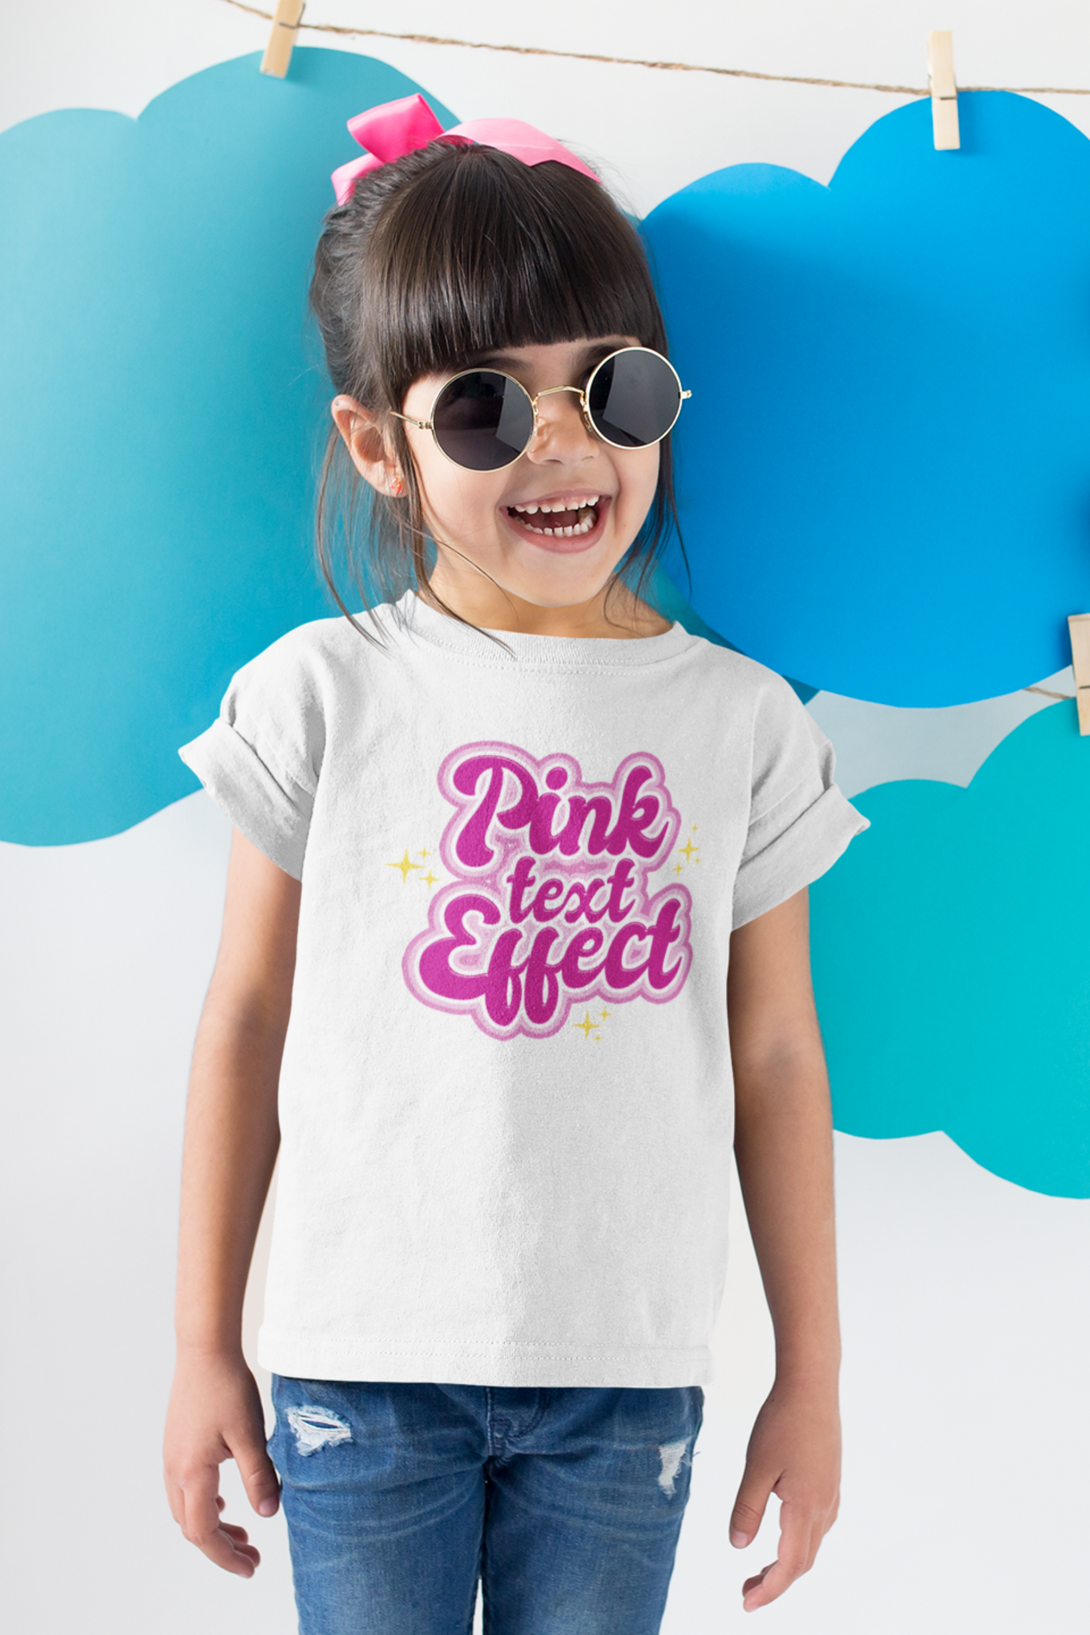 Pink Text Effect Printed T-Shirt For Girl - WowWaves - 3